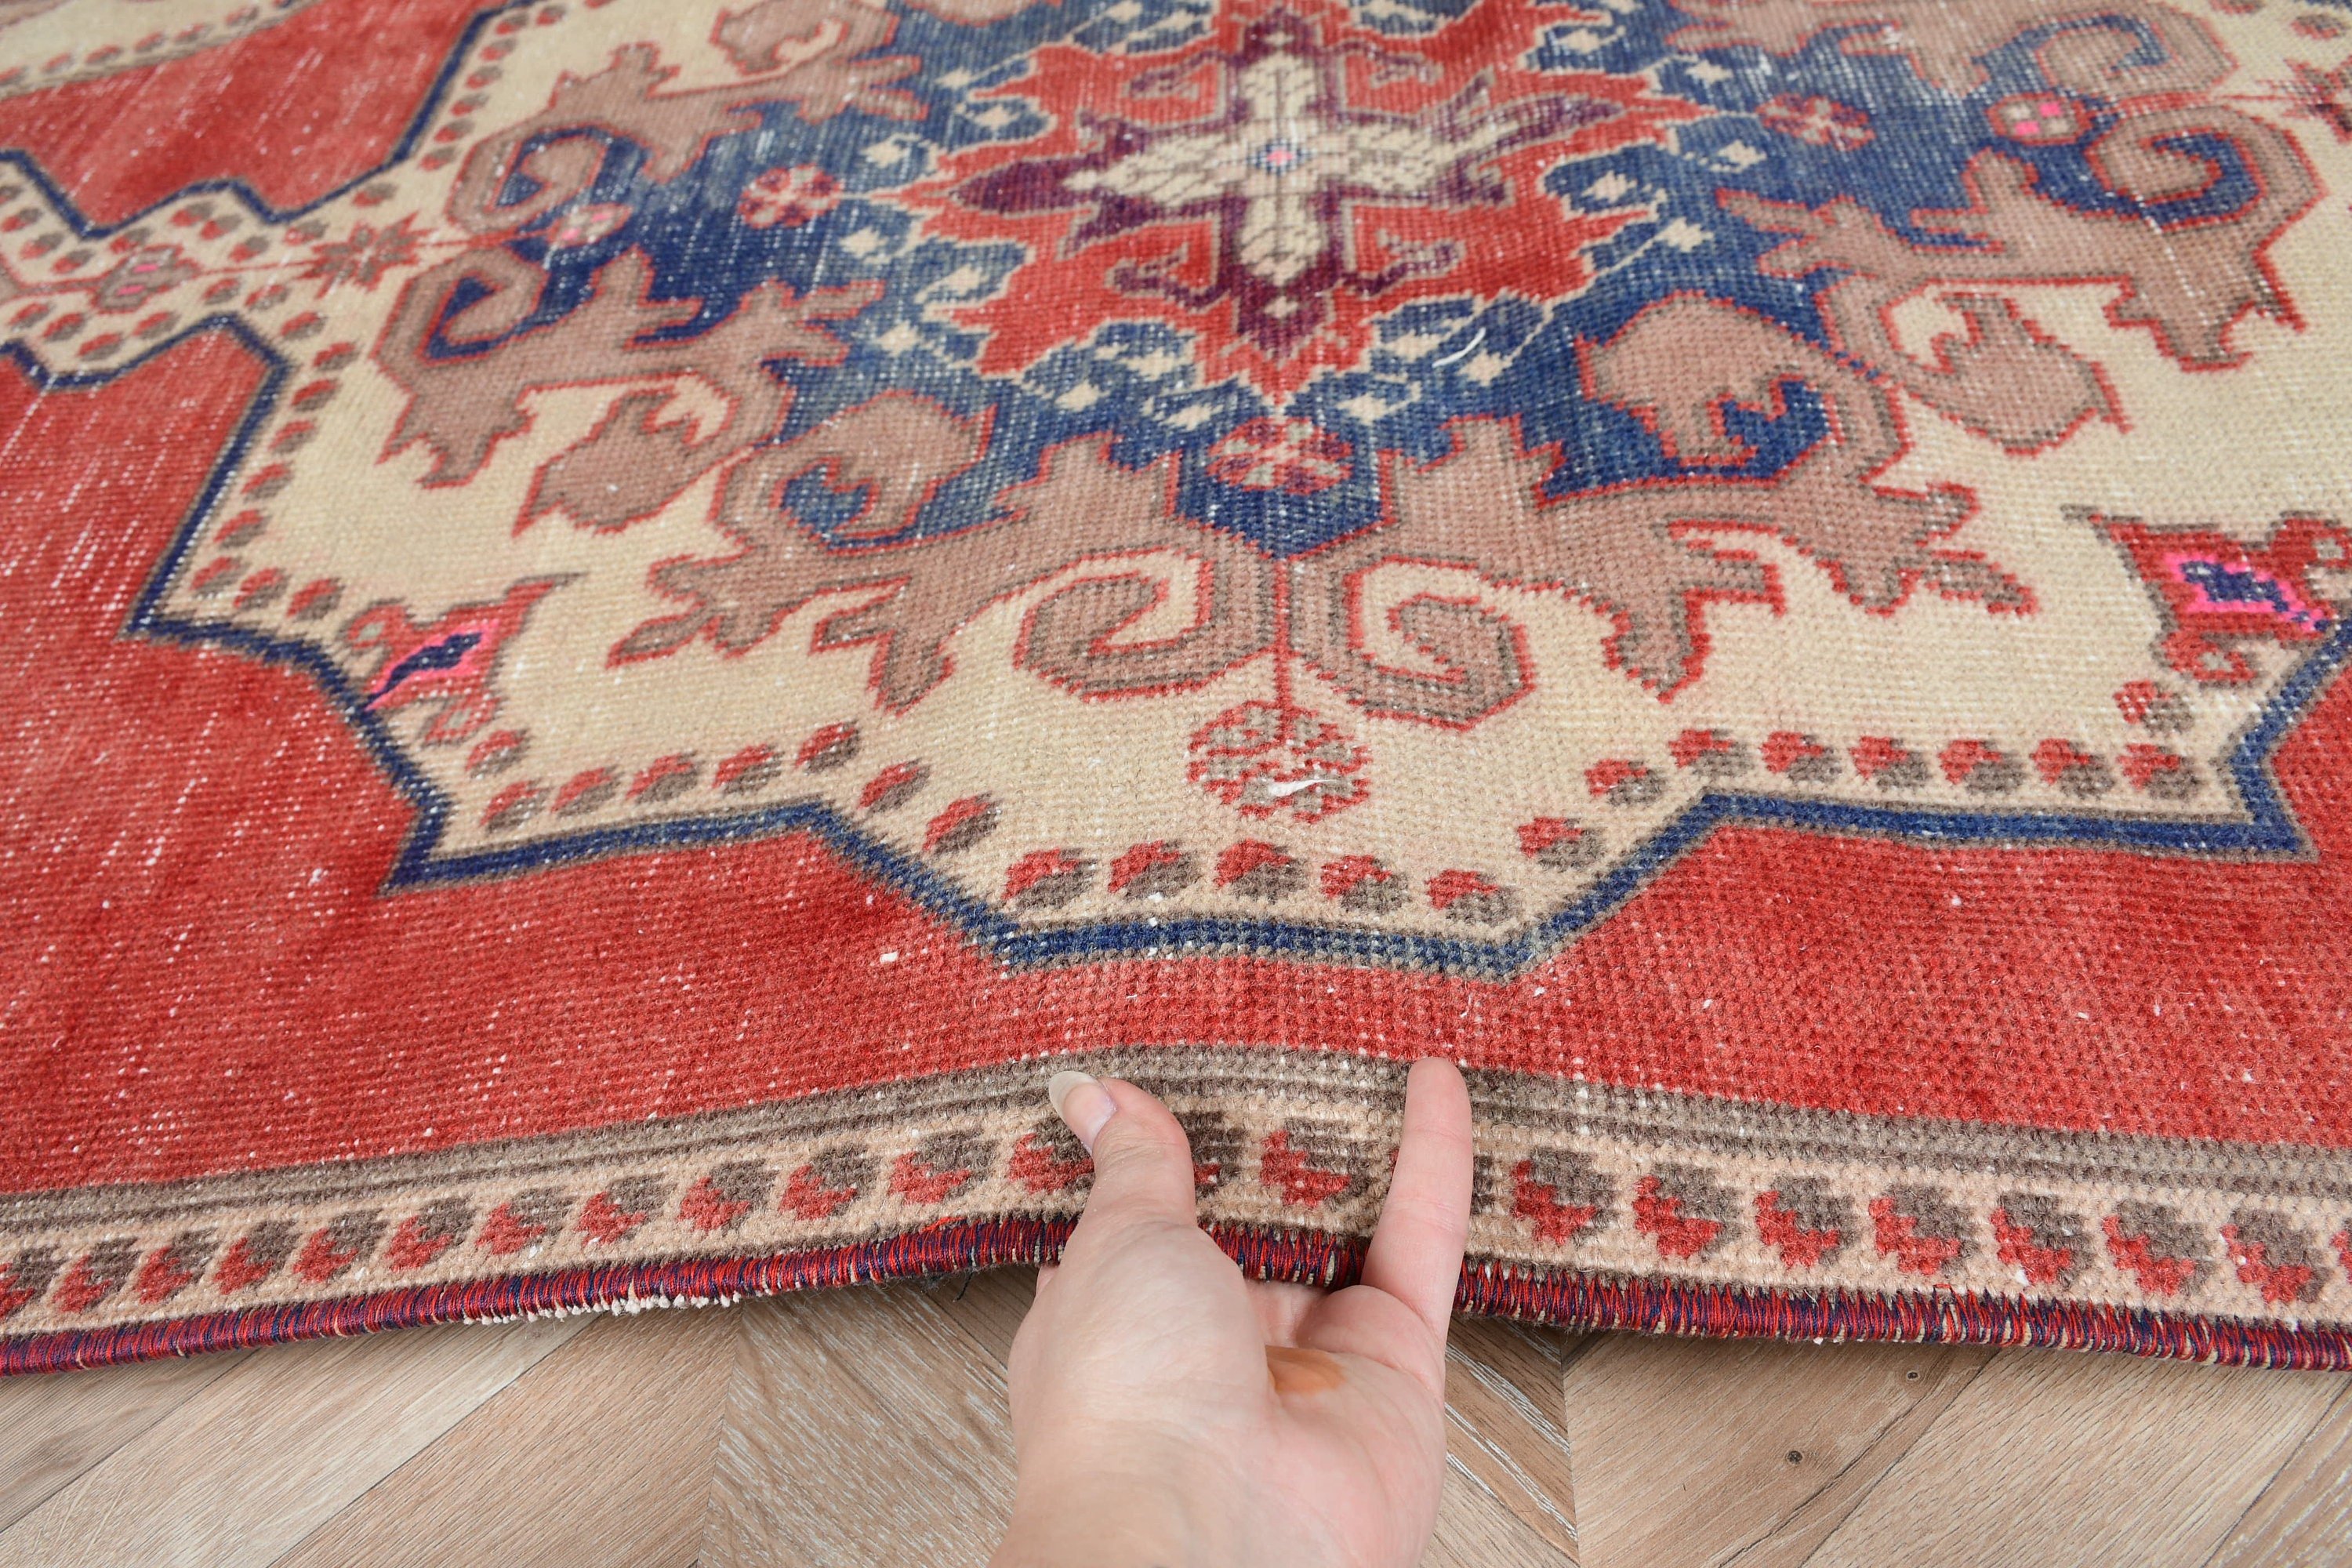 Floor Rugs, Bedroom Rug, Turkish Rugs, Pale Rugs, Red Kitchen Rug, Vintage Rug, Rugs for Bedroom, Home Decor Rug, 3.4x6.3 ft Accent Rugs